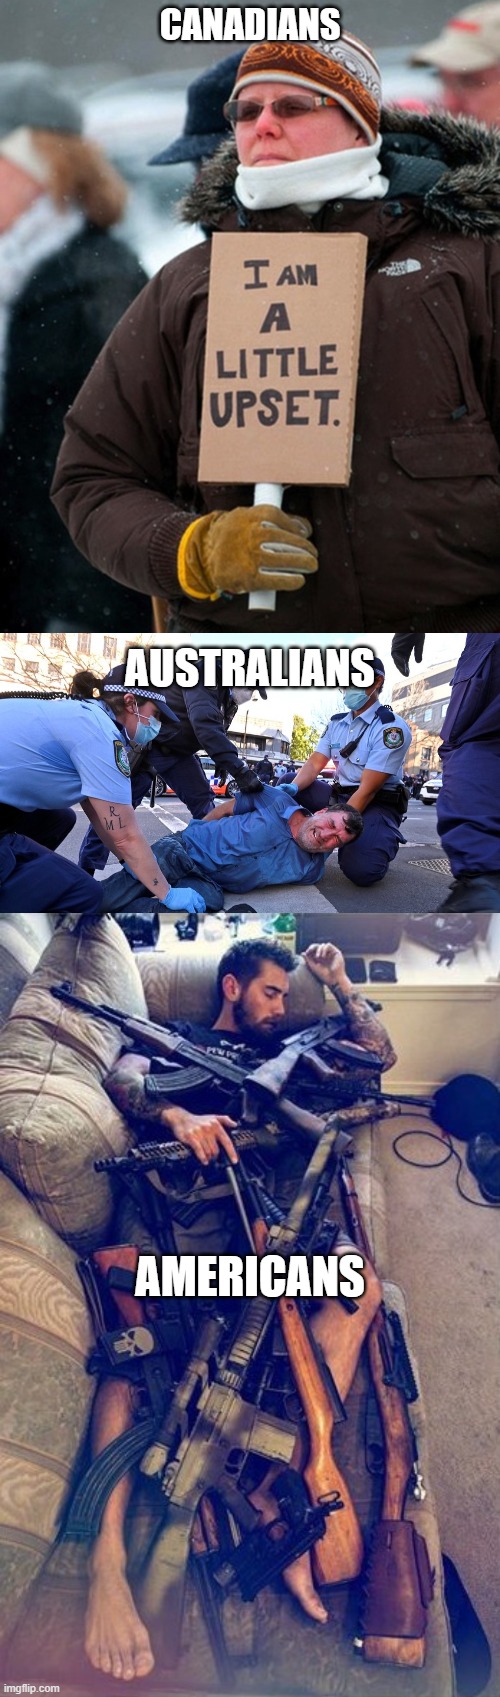 Let the god times roll. | CANADIANS; AUSTRALIANS; AMERICANS | image tagged in canadian protest,australian prison colony police state,gun control,'murica,politics,tyranny | made w/ Imgflip meme maker